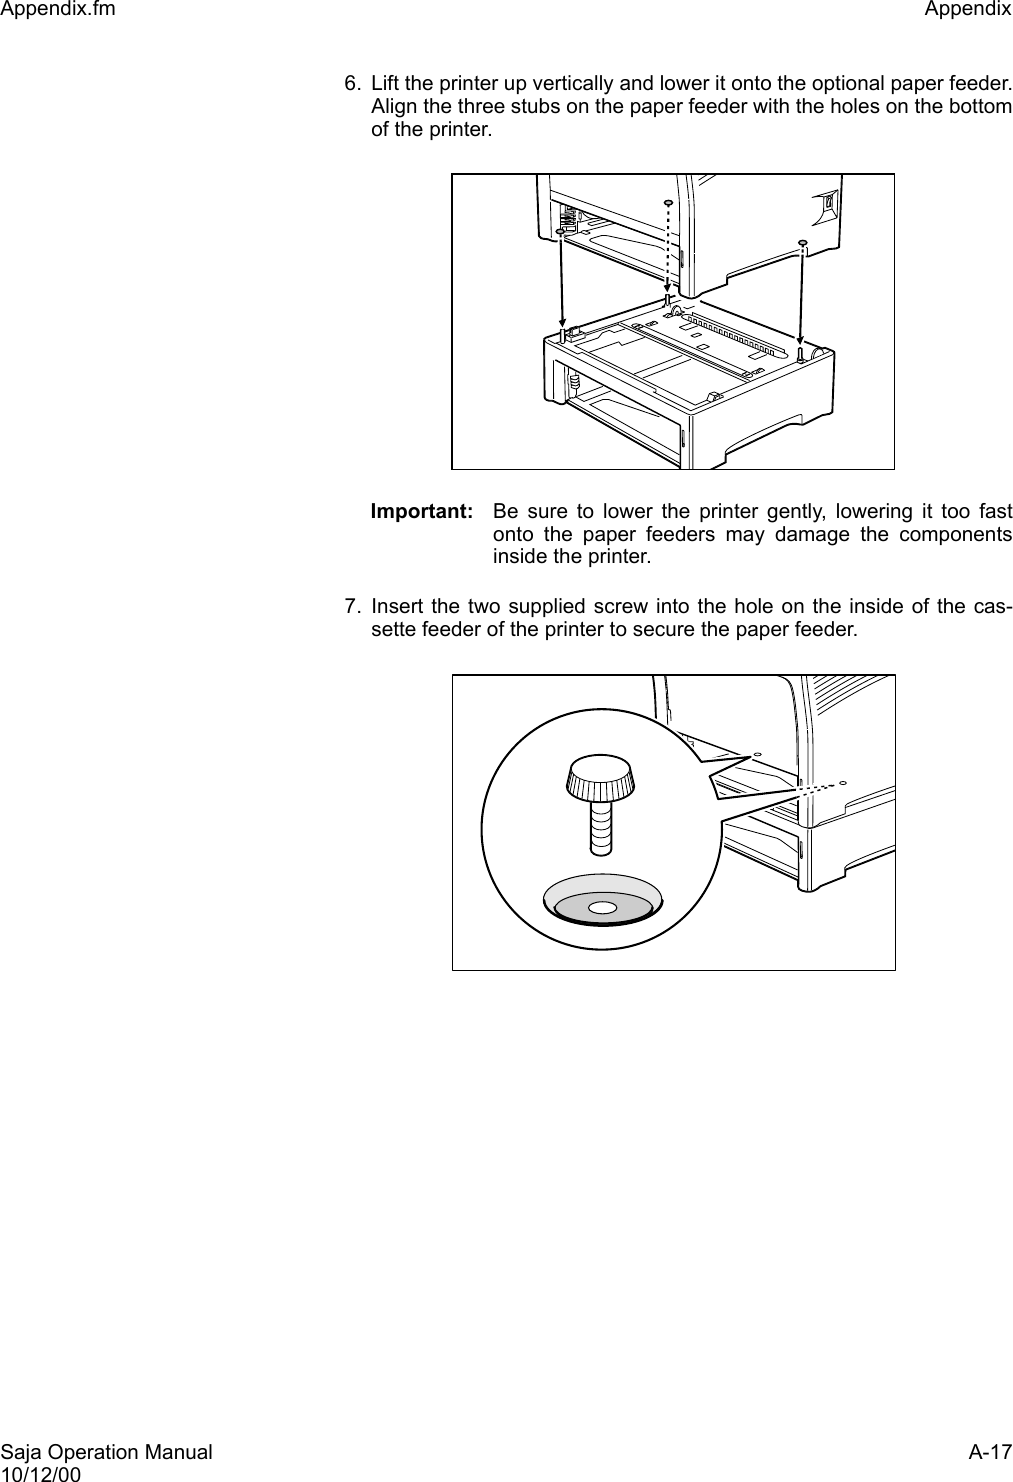 Saja Operation Manual A-1710/12/00Appendix.fm Appendix 6. Lift the printer up vertically and lower it onto the optional paper feeder.Align the three stubs on the paper feeder with the holes on the bottomof the printer.Important: Be sure to lower the printer gently, lowering it too fastonto the paper feeders may damage the componentsinside the printer.7. Insert the two supplied screw into the hole on the inside of the cas-sette feeder of the printer to secure the paper feeder. 